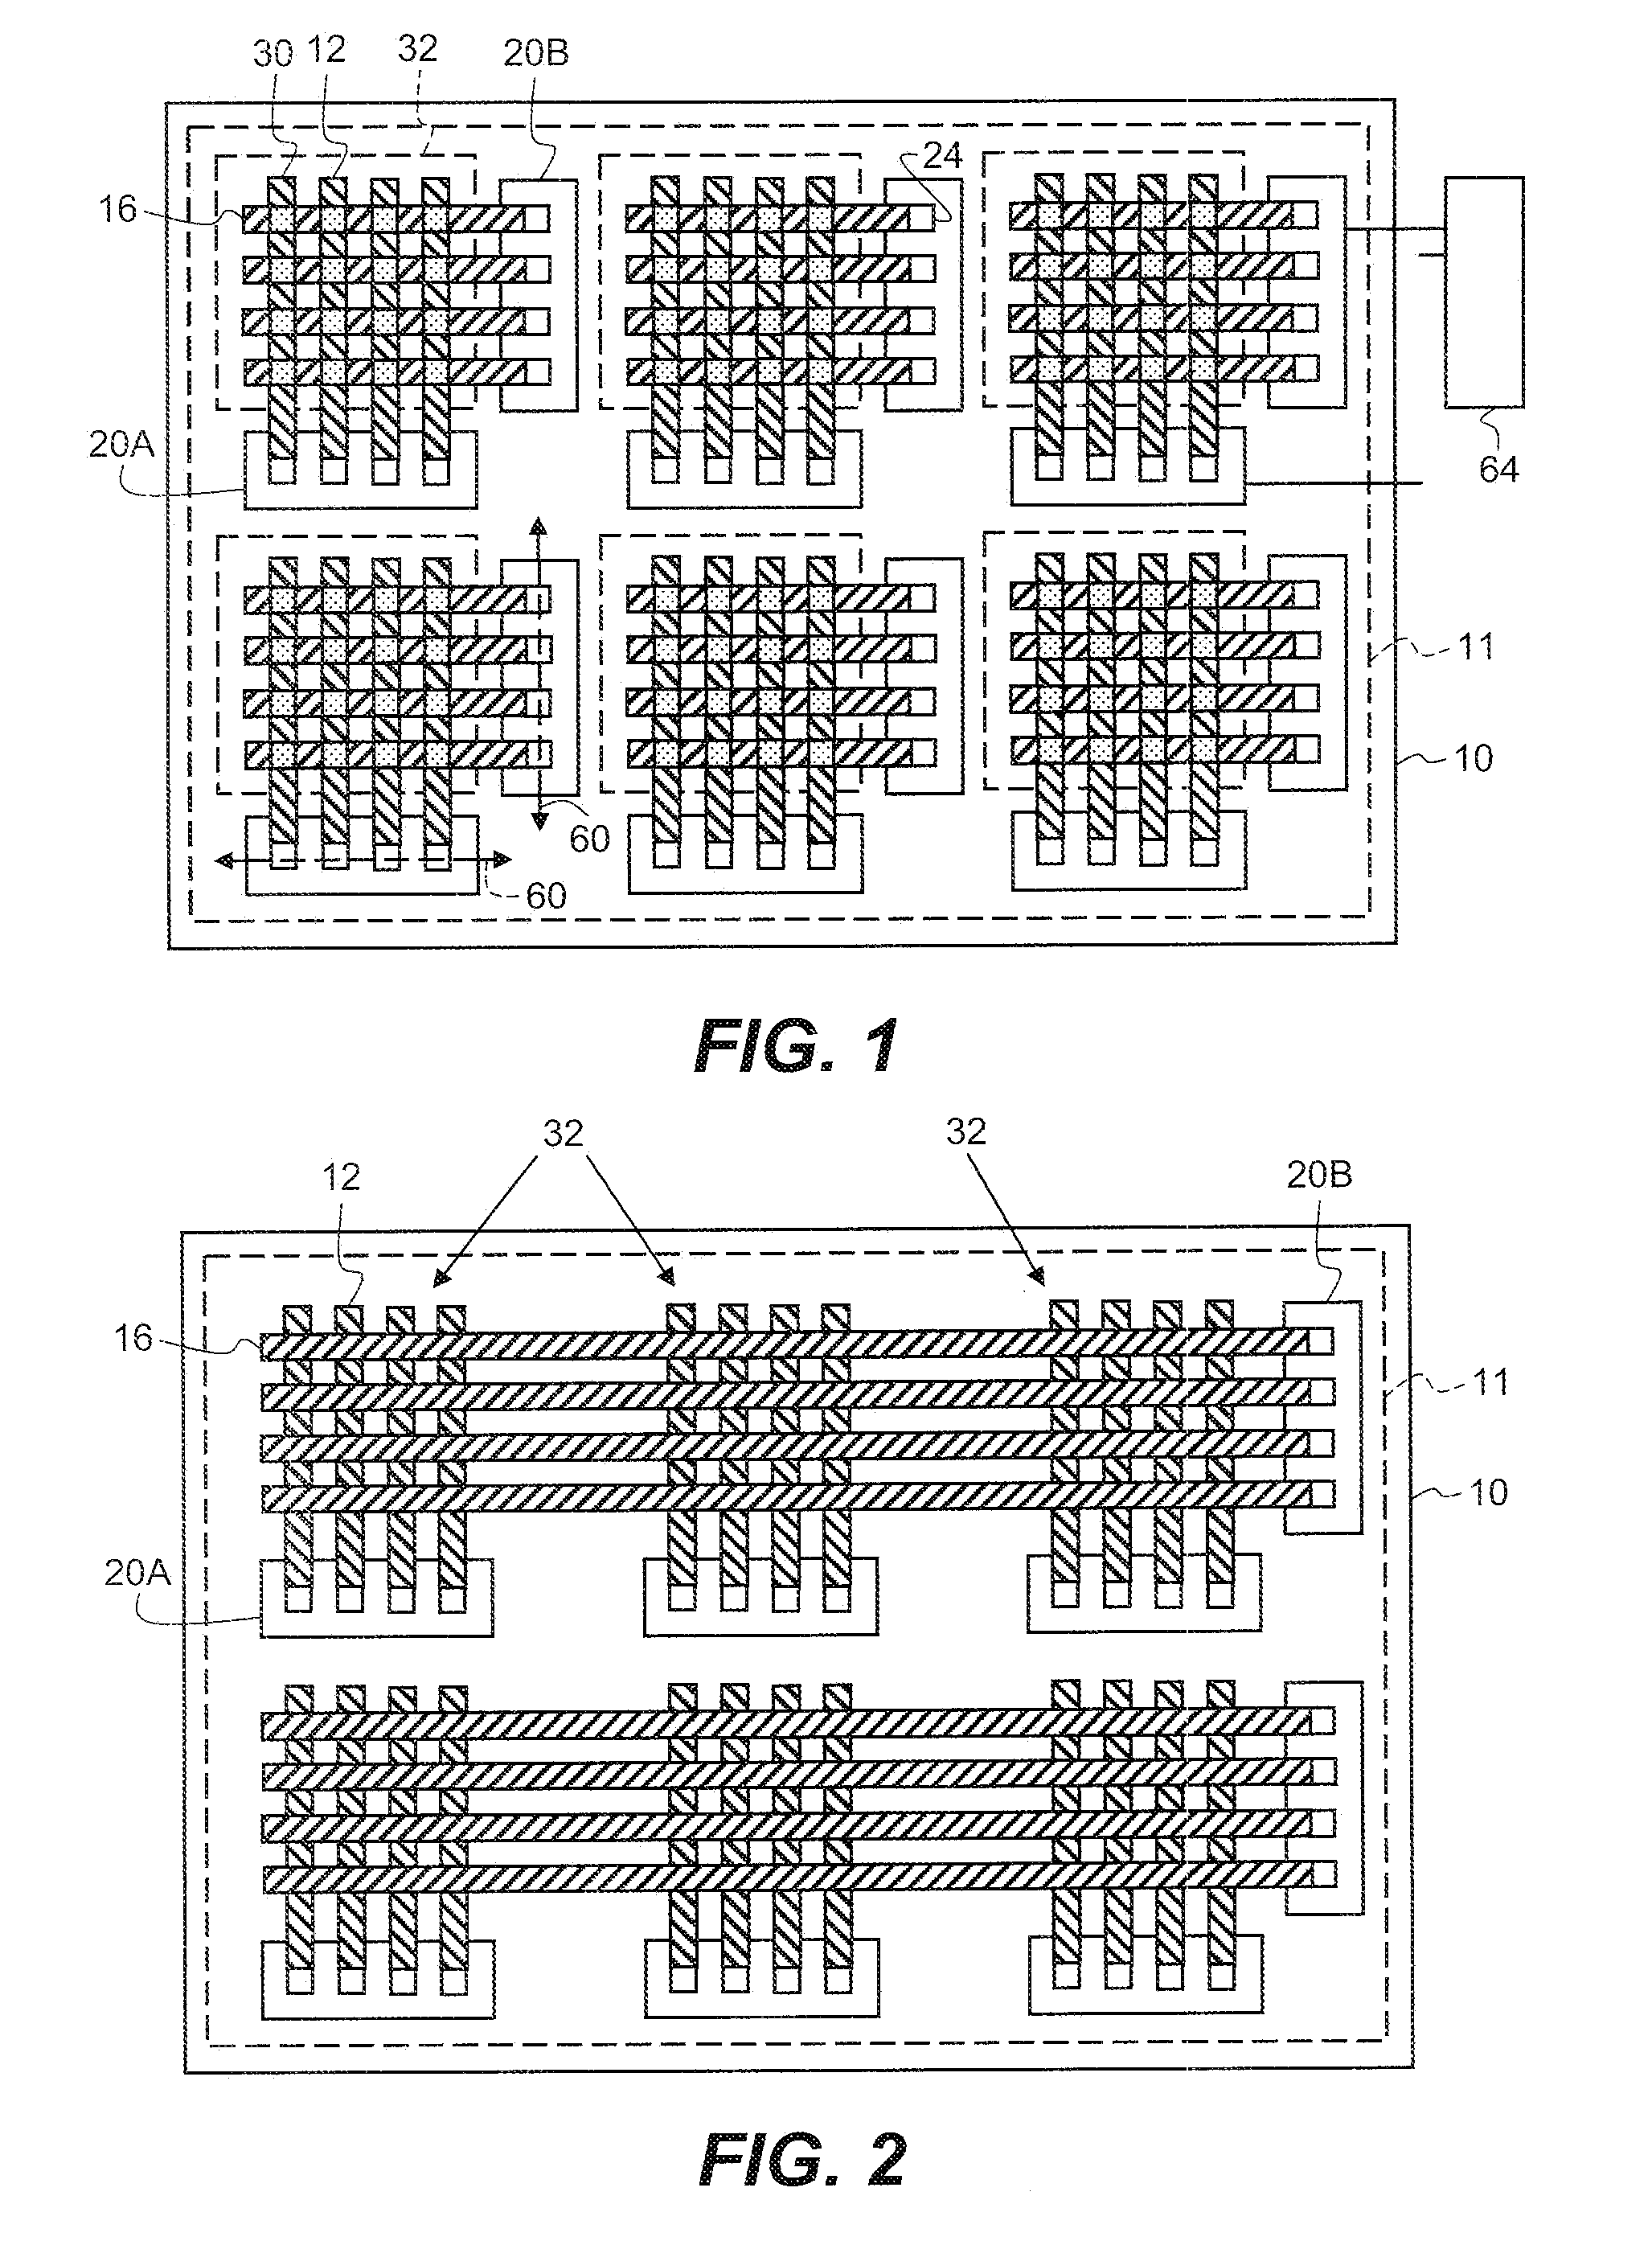 Chiplet display with oriented chiplets and busses